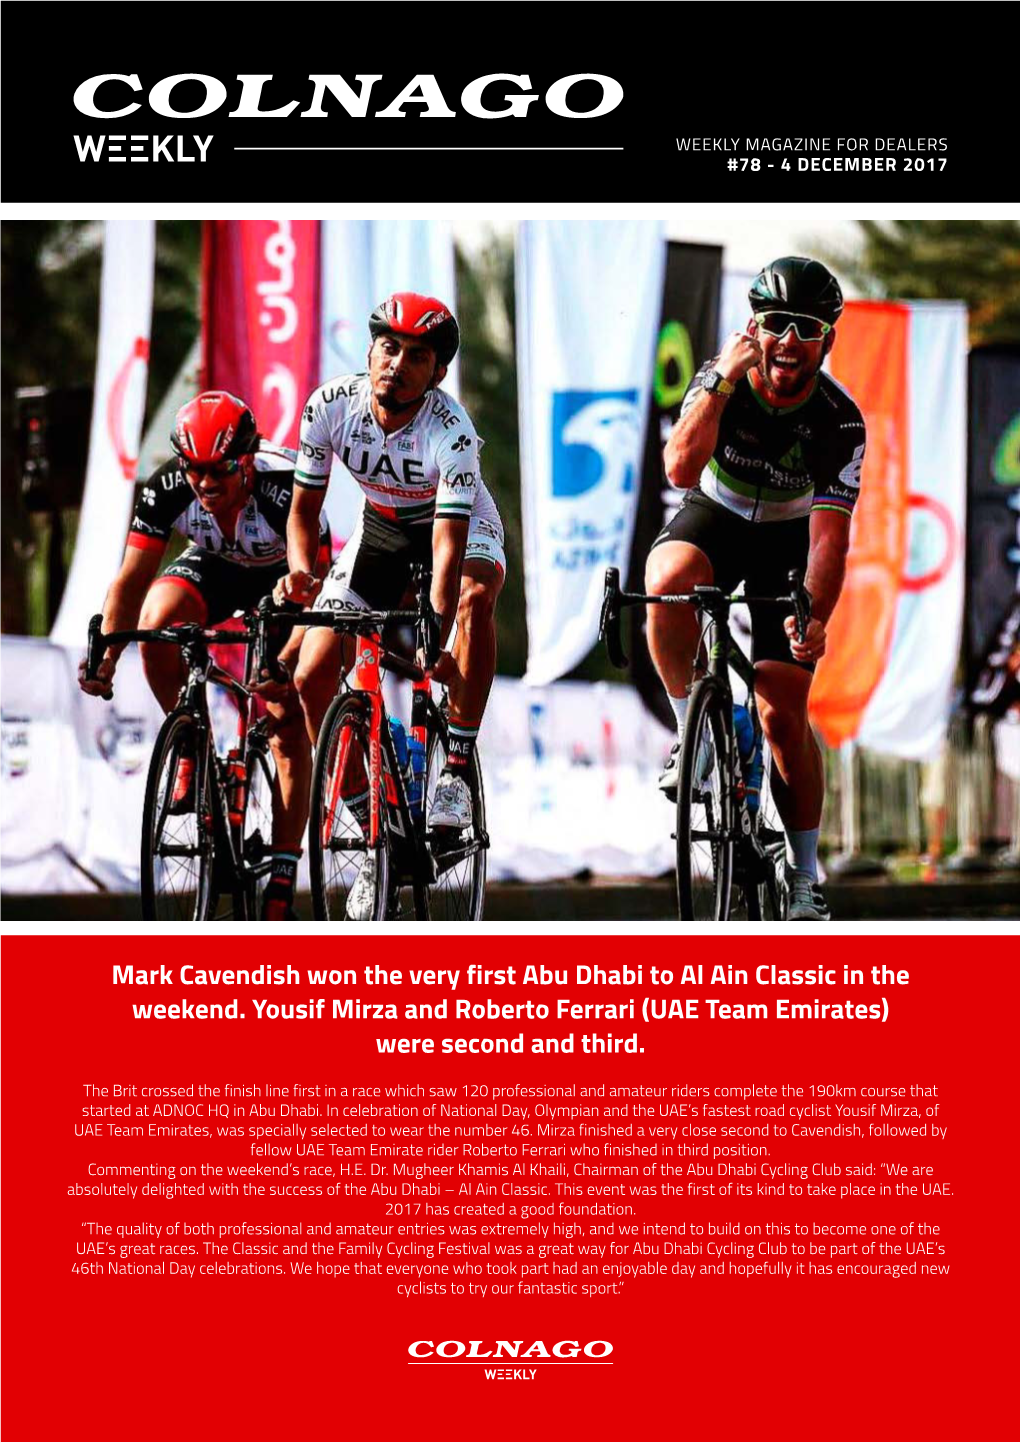 Mark Cavendish Won the Very First Abu Dhabi to Al Ain Classic in the Weekend. Yousif Mirza and Roberto Ferrari (UAE Team Emirates) Were Second and Third